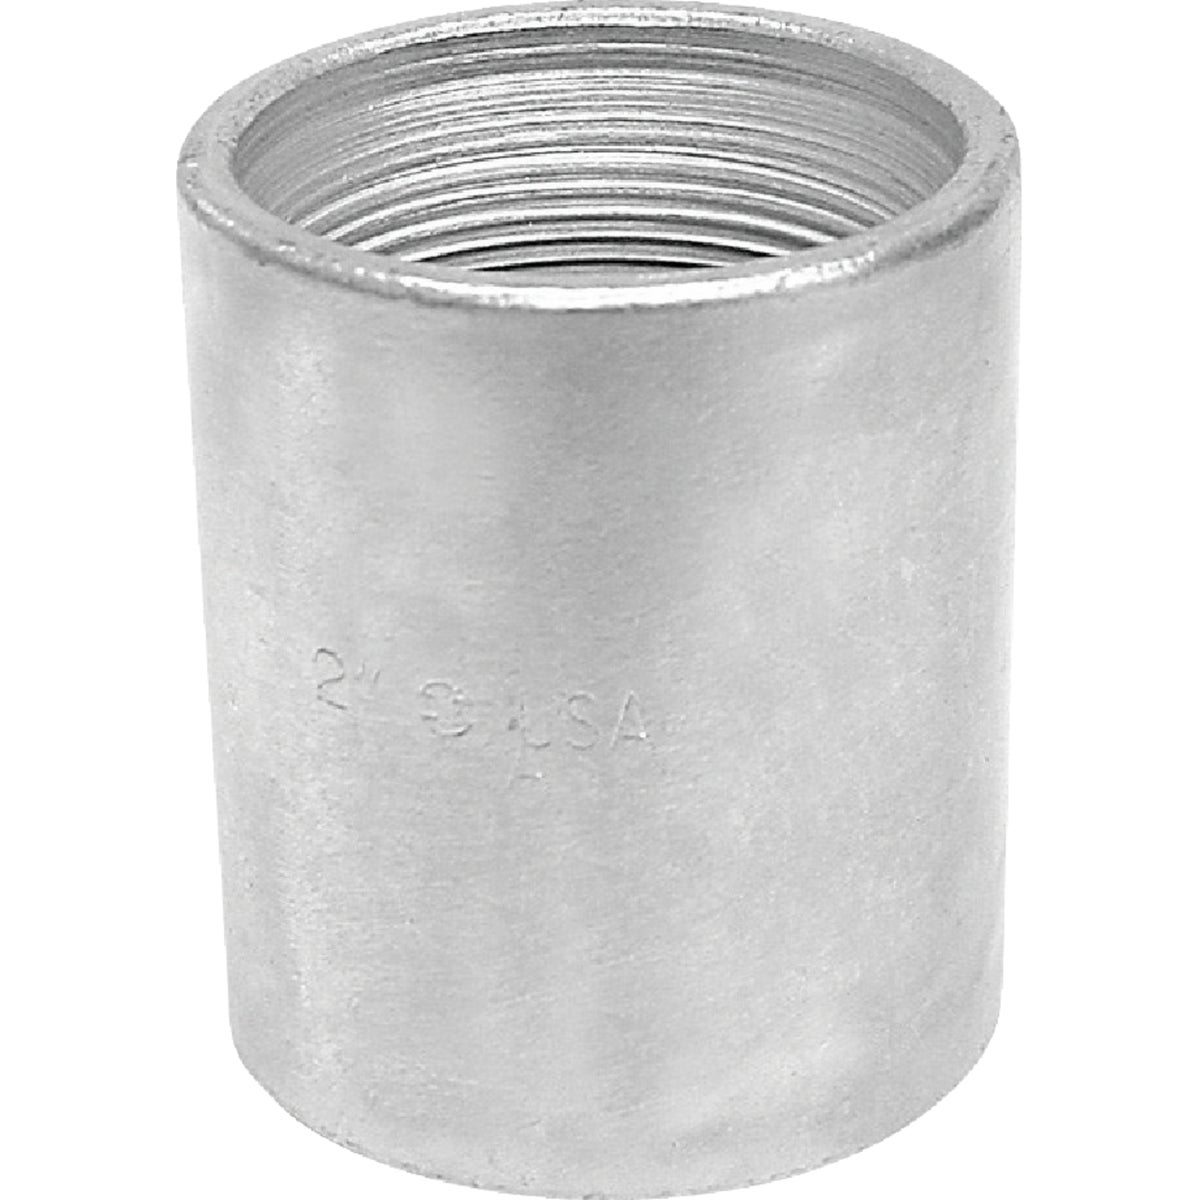 Southland 1 In. x 1 In. FPT Standard Merchant Galvanized Coupling